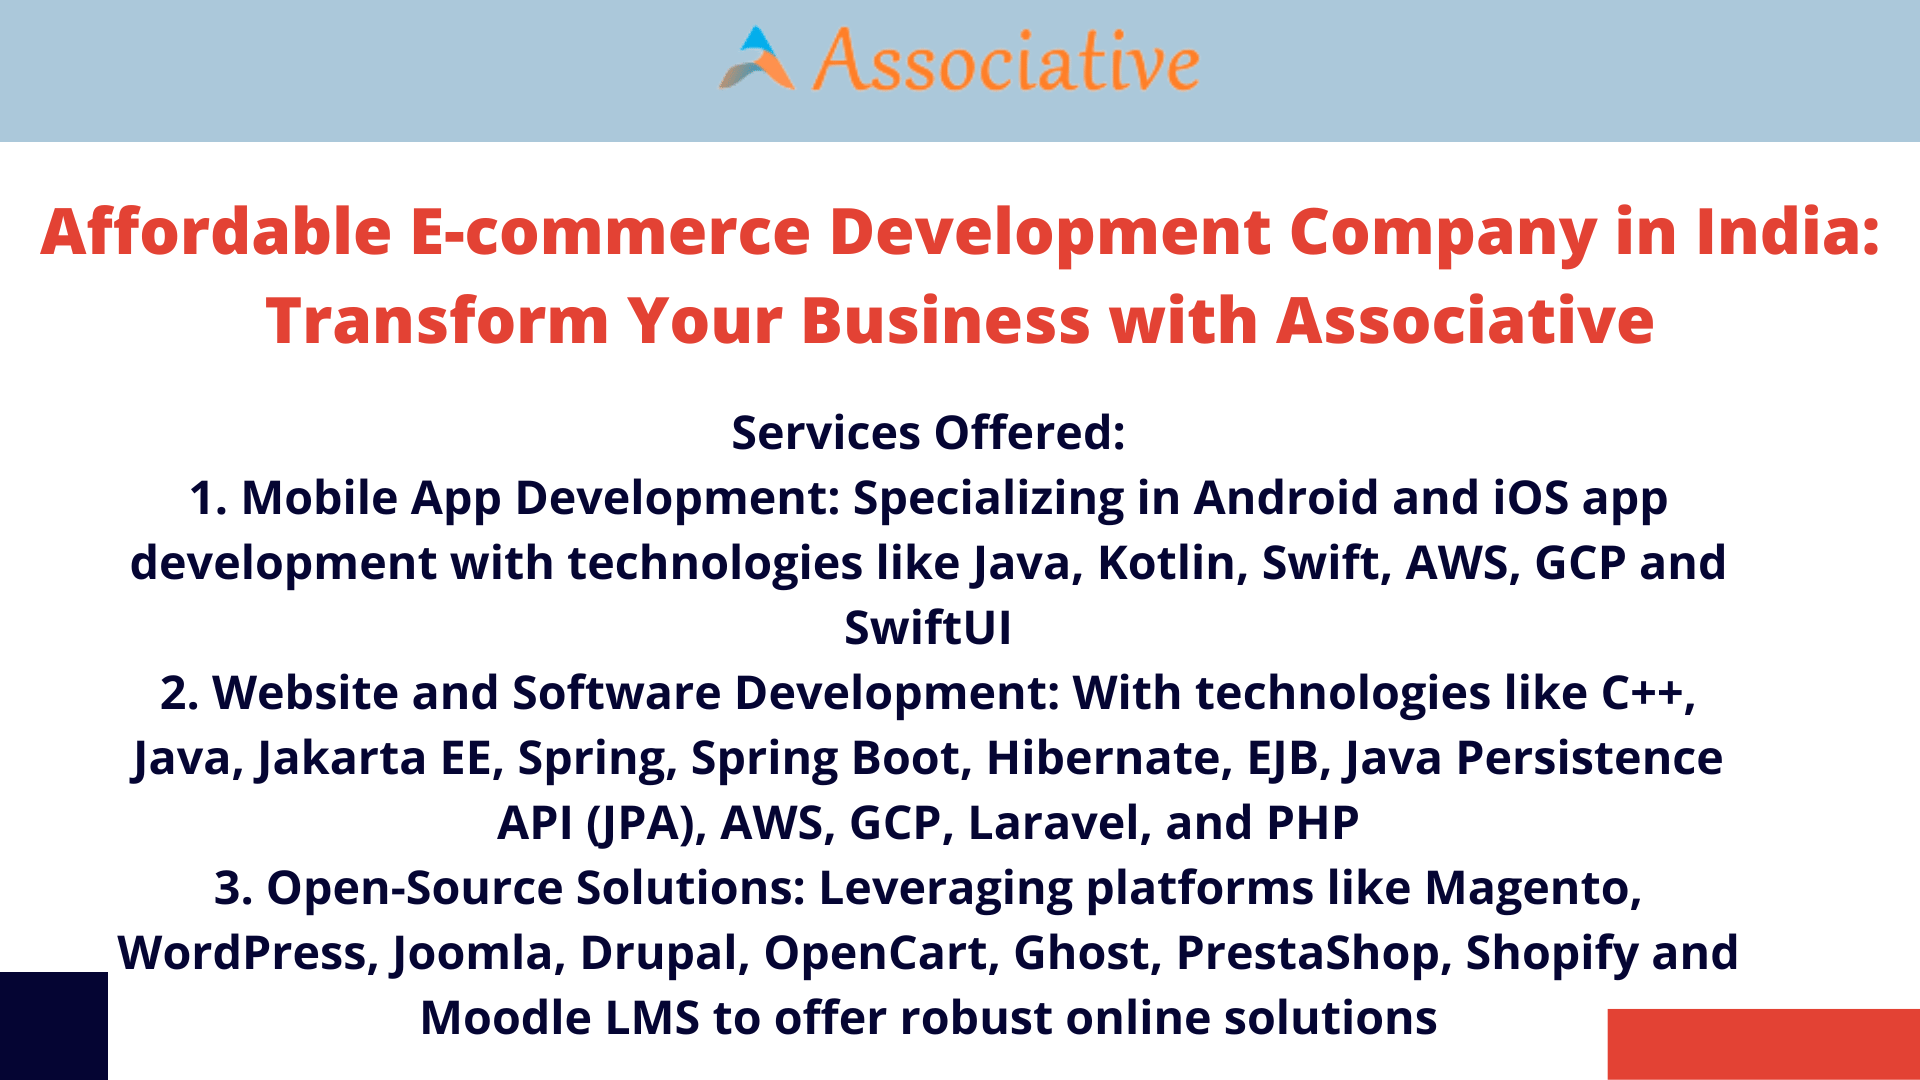 Affordable E-commerce Development Company in India Transform Your Business with Associative